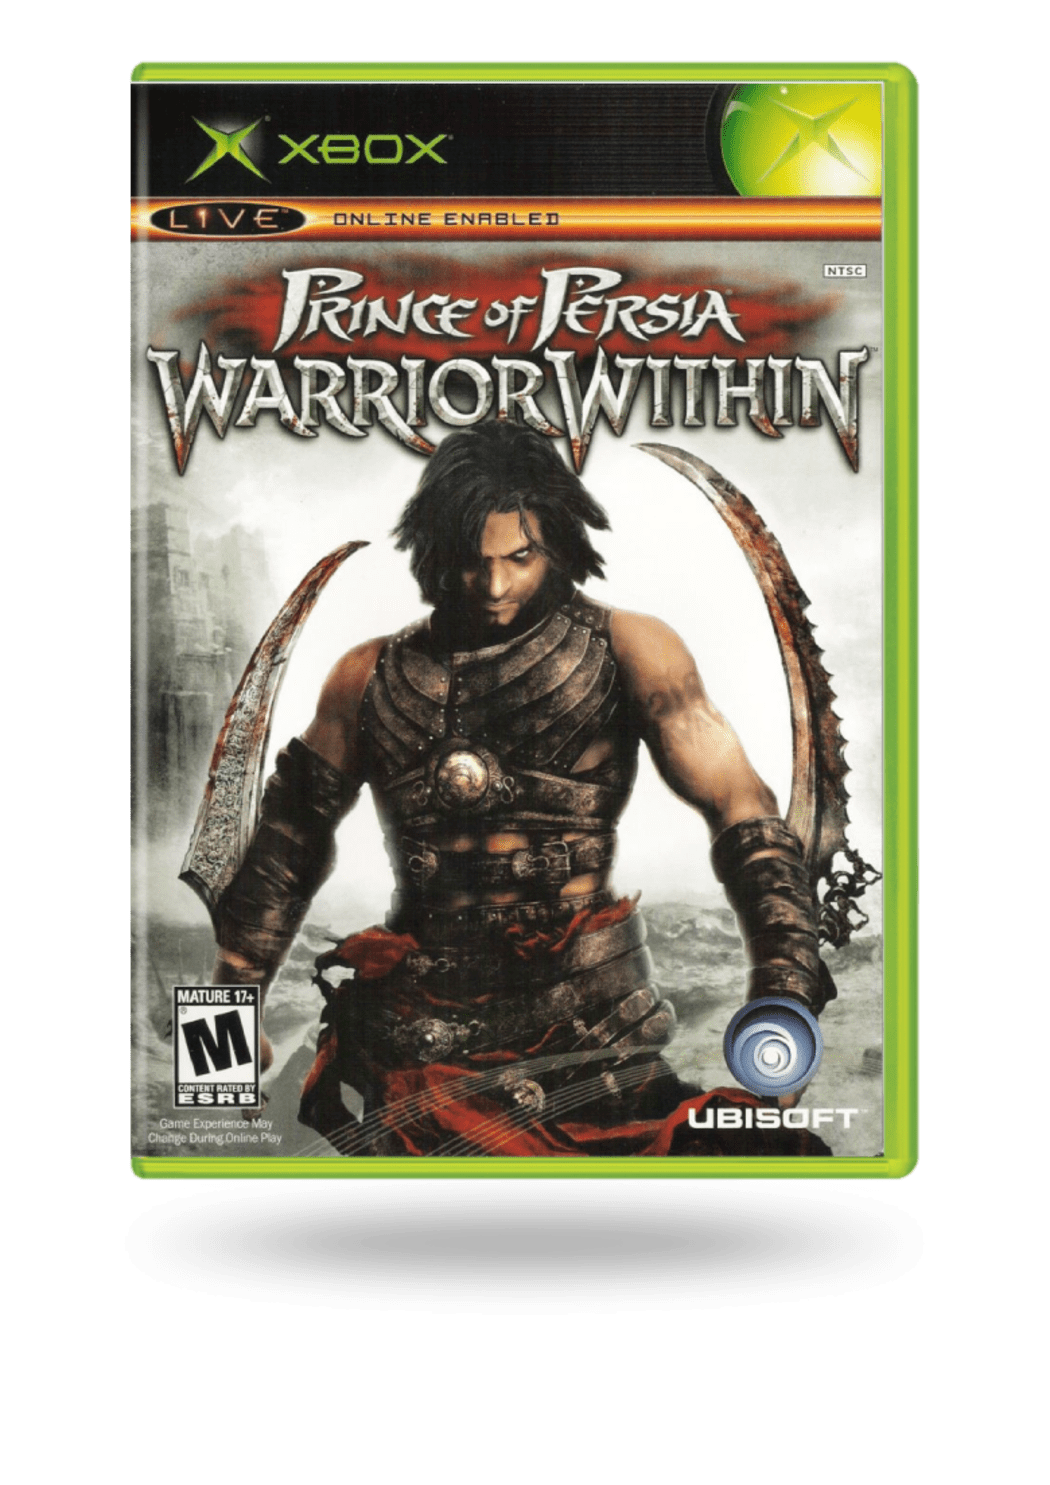 Xbox Prince of Persia: Warrior Within Games